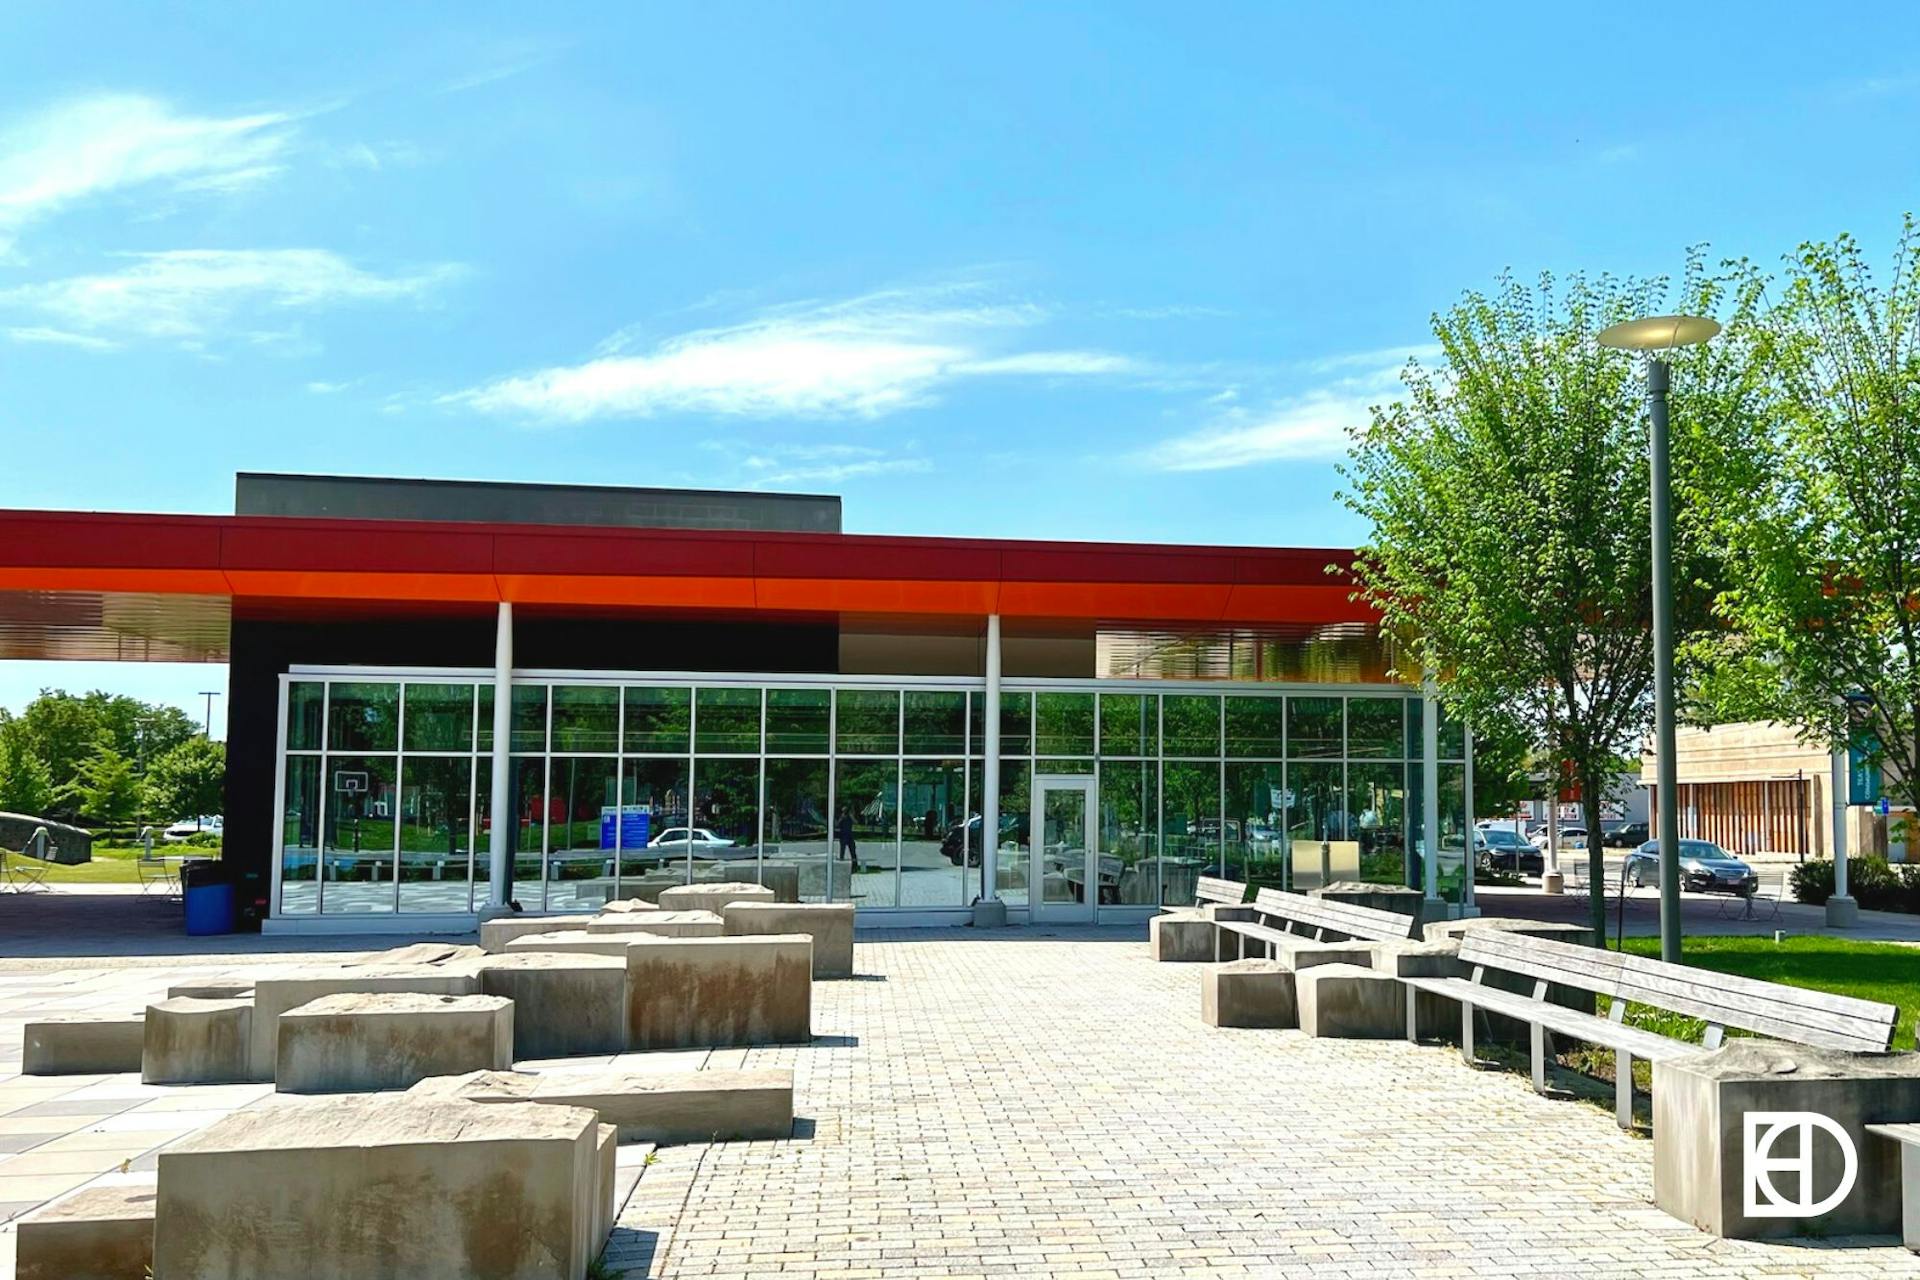 Exterior photo of Tarkington Park in Midtown Indianapolis, showing the community center